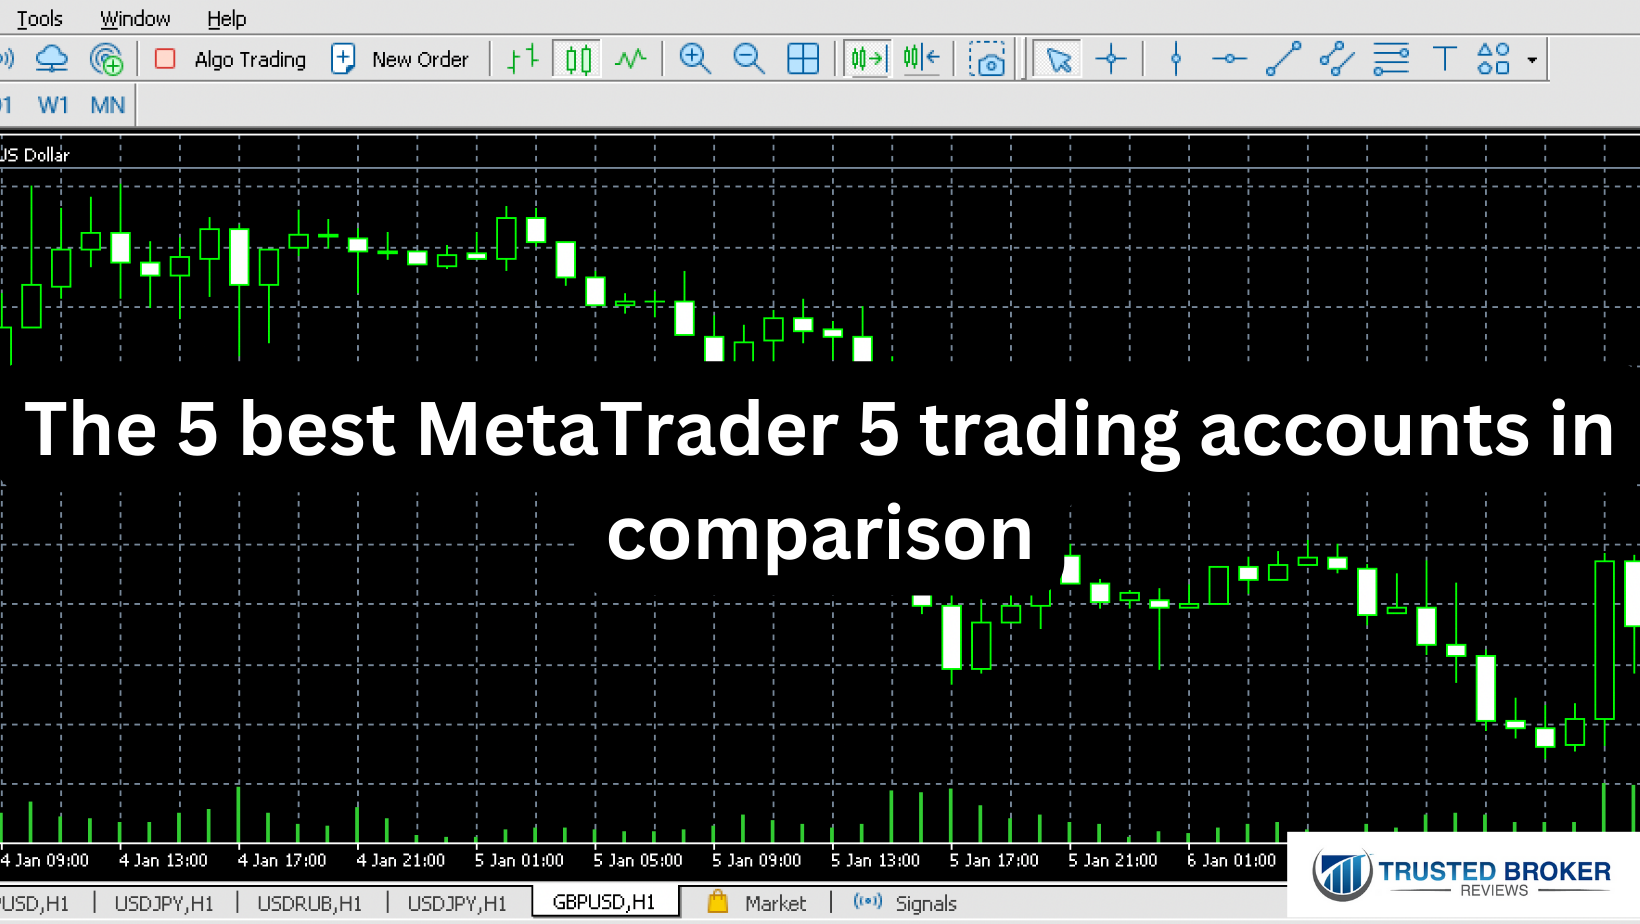 The 5 best MetaTrader 5 trading accounts in comparison